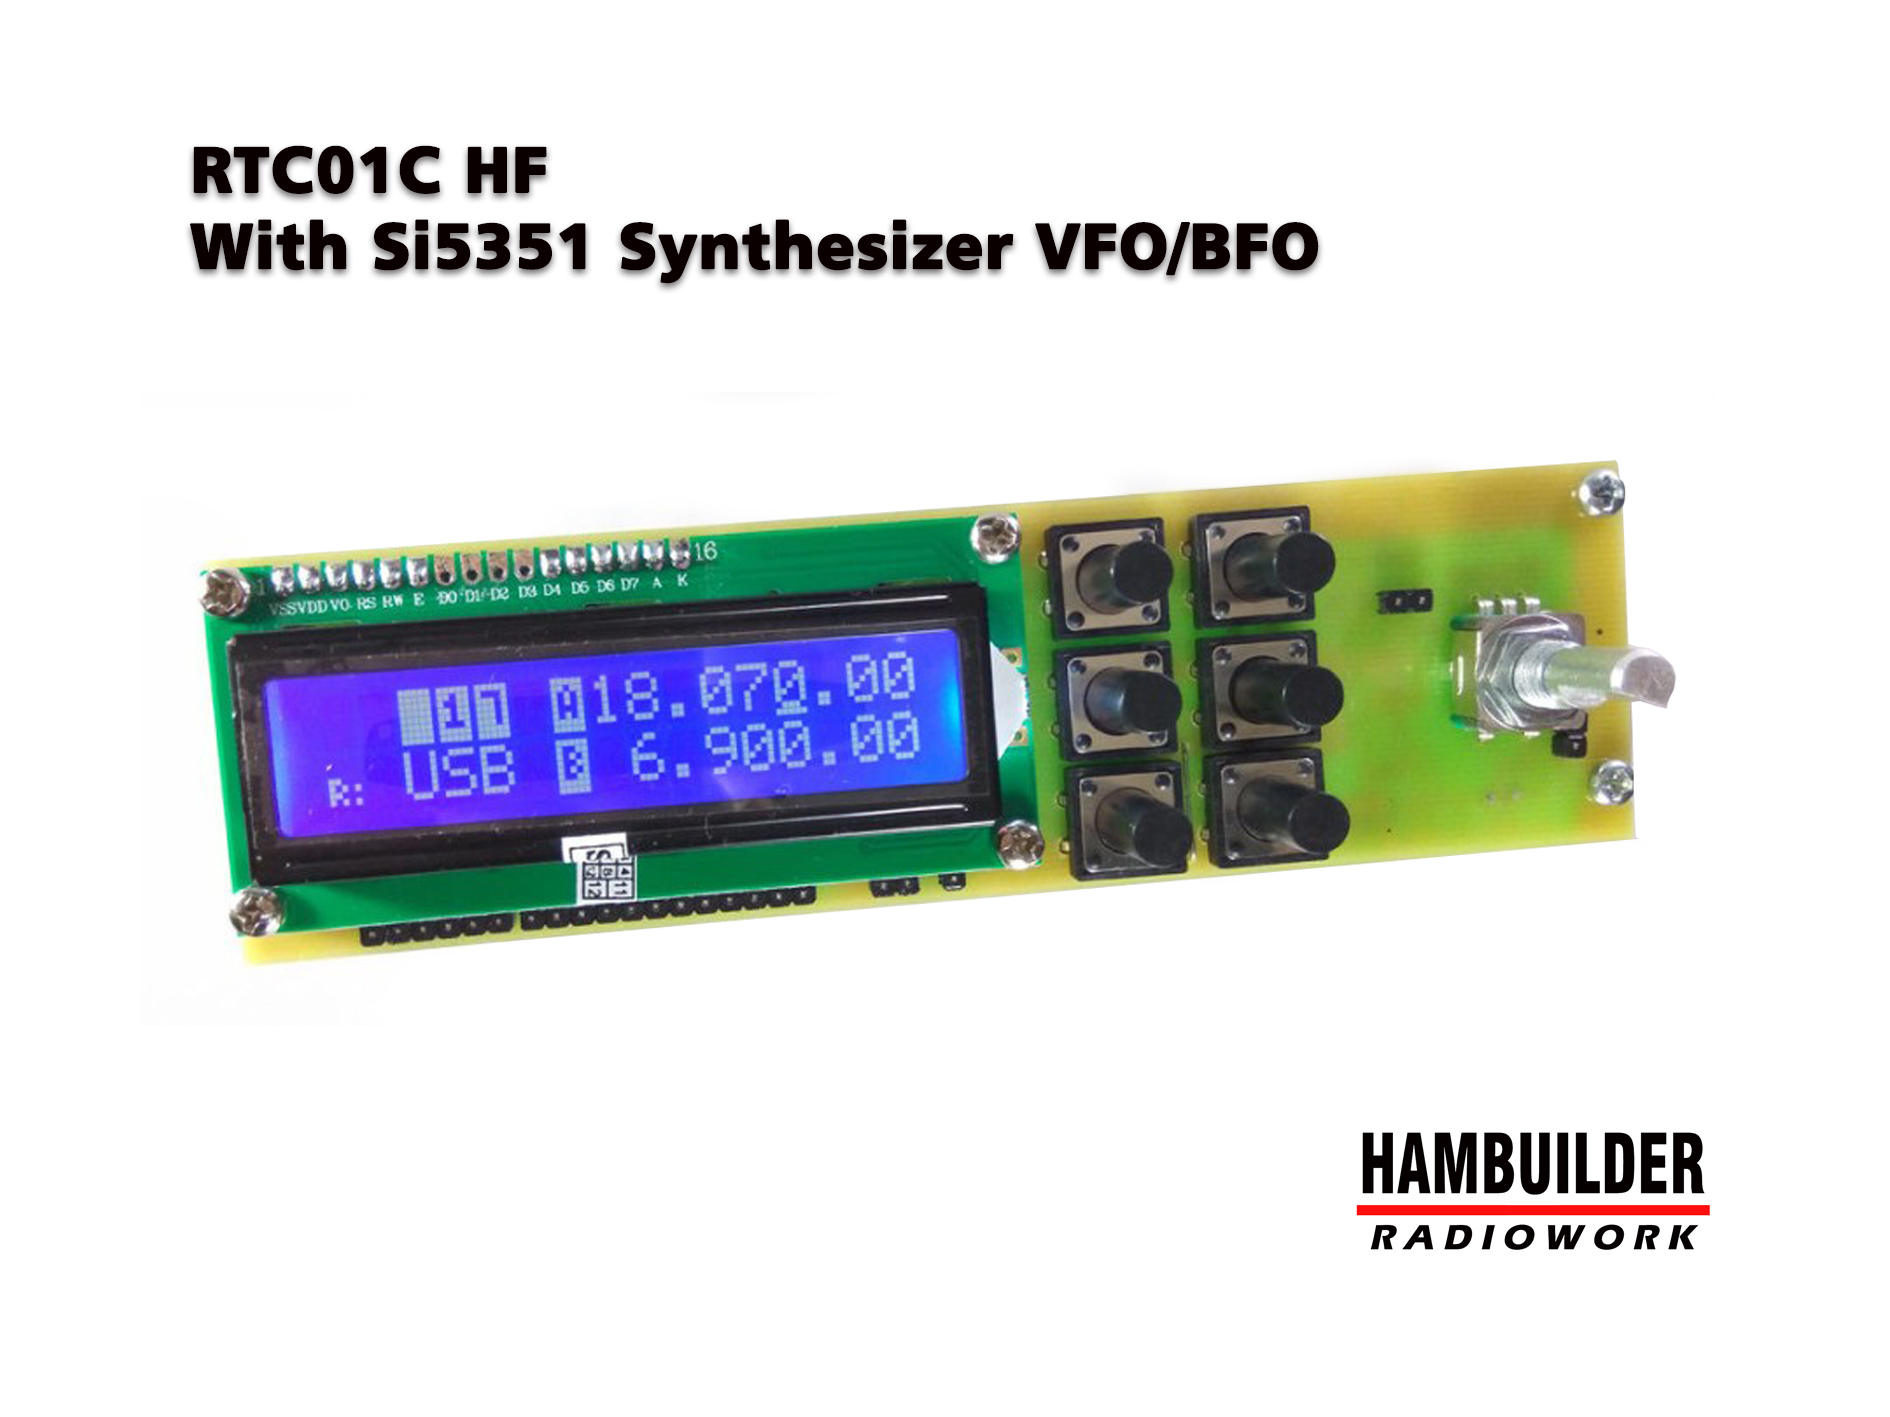 RTC01C HF with Si5351 Synthesizer VFO/BFO